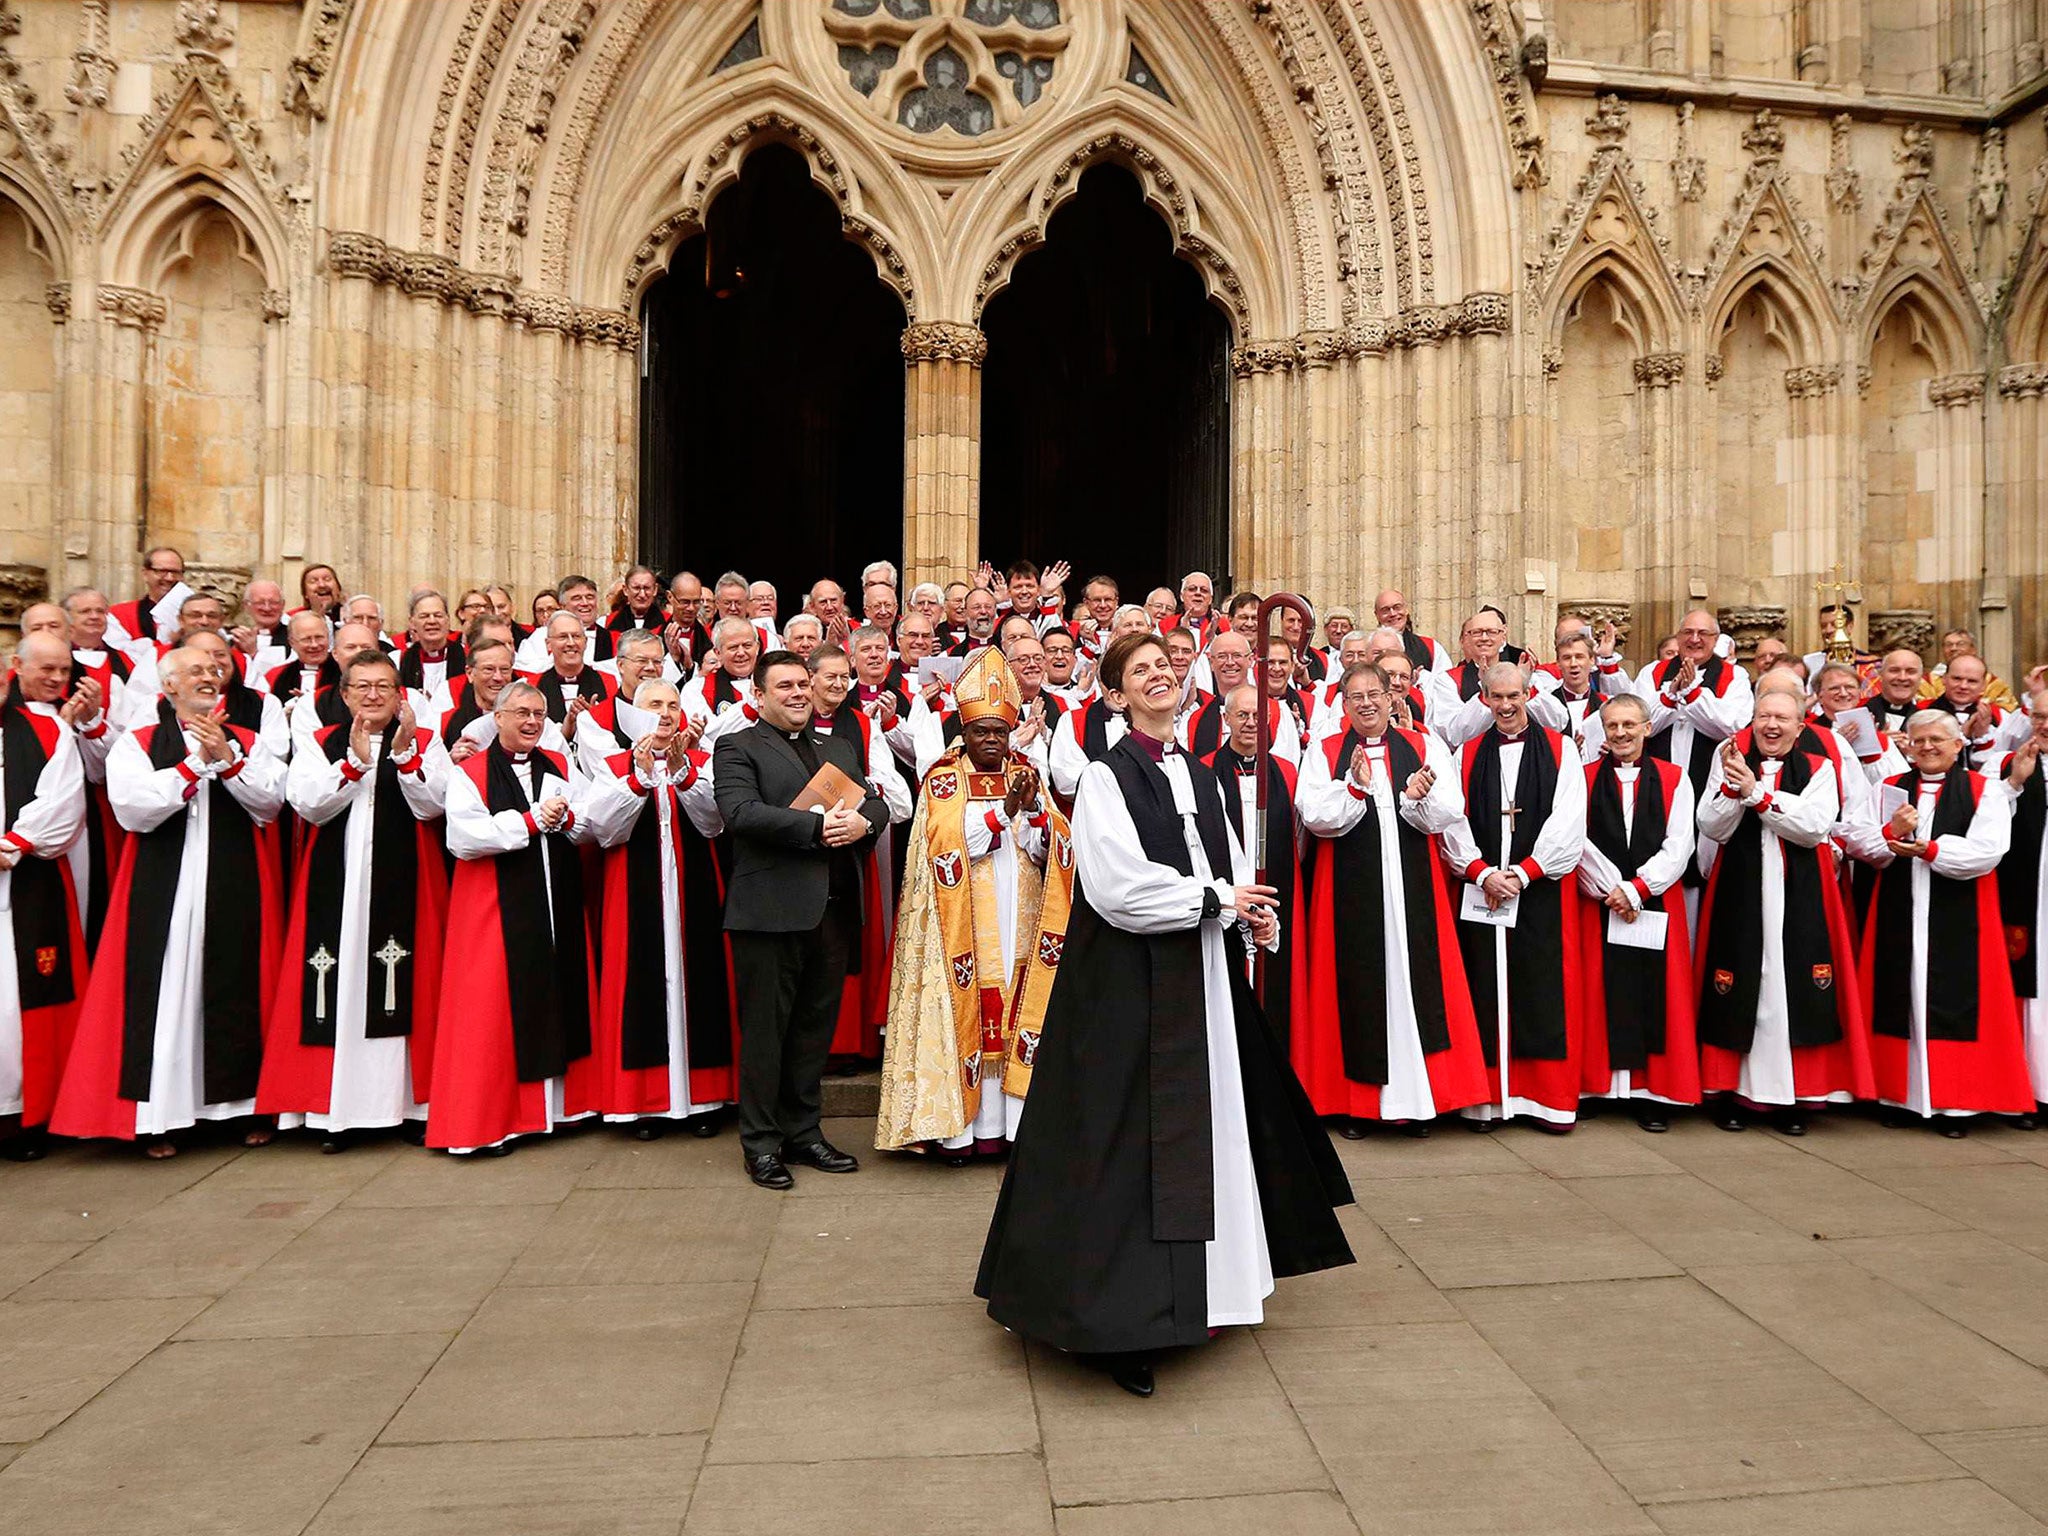 Libby Lane, the first female bishop in the Church of England, smiles following her consecration service at York Minster in York